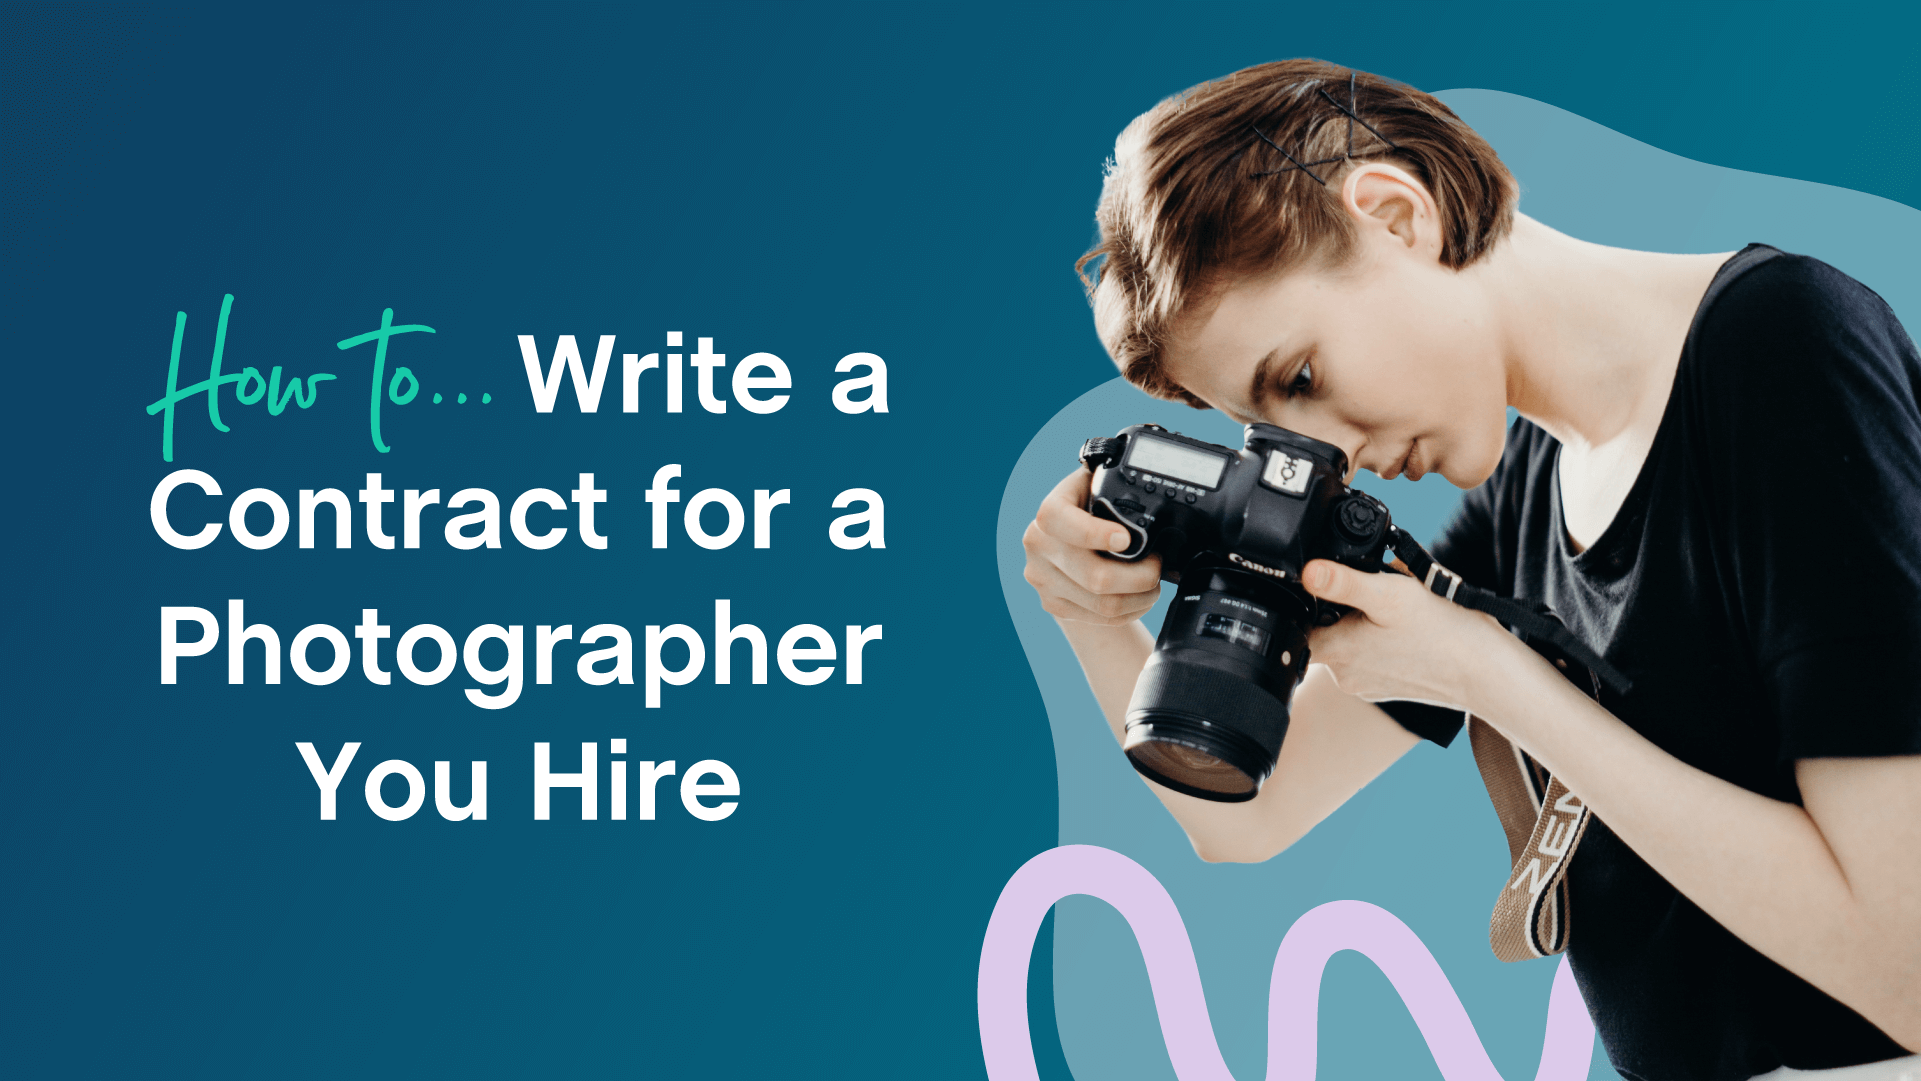 How to Write a Contract for a Photographer You Hire